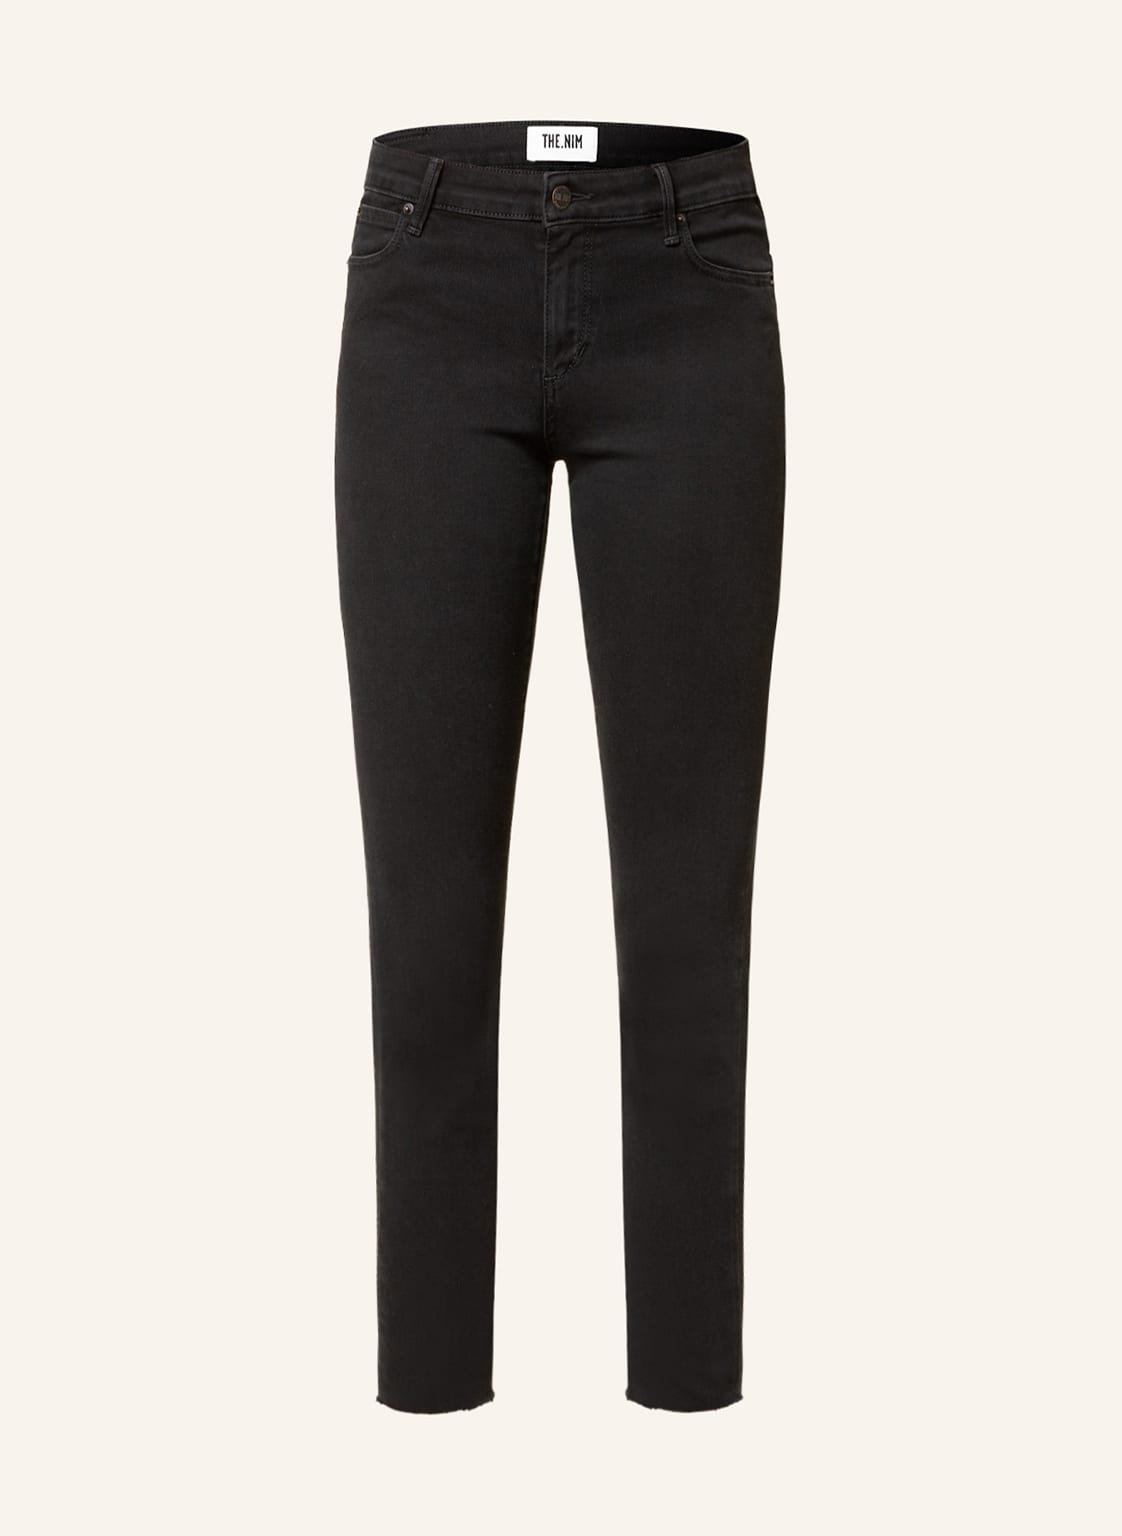 Image of The.Nim Standard 7/8-Jeans Holly schwarz